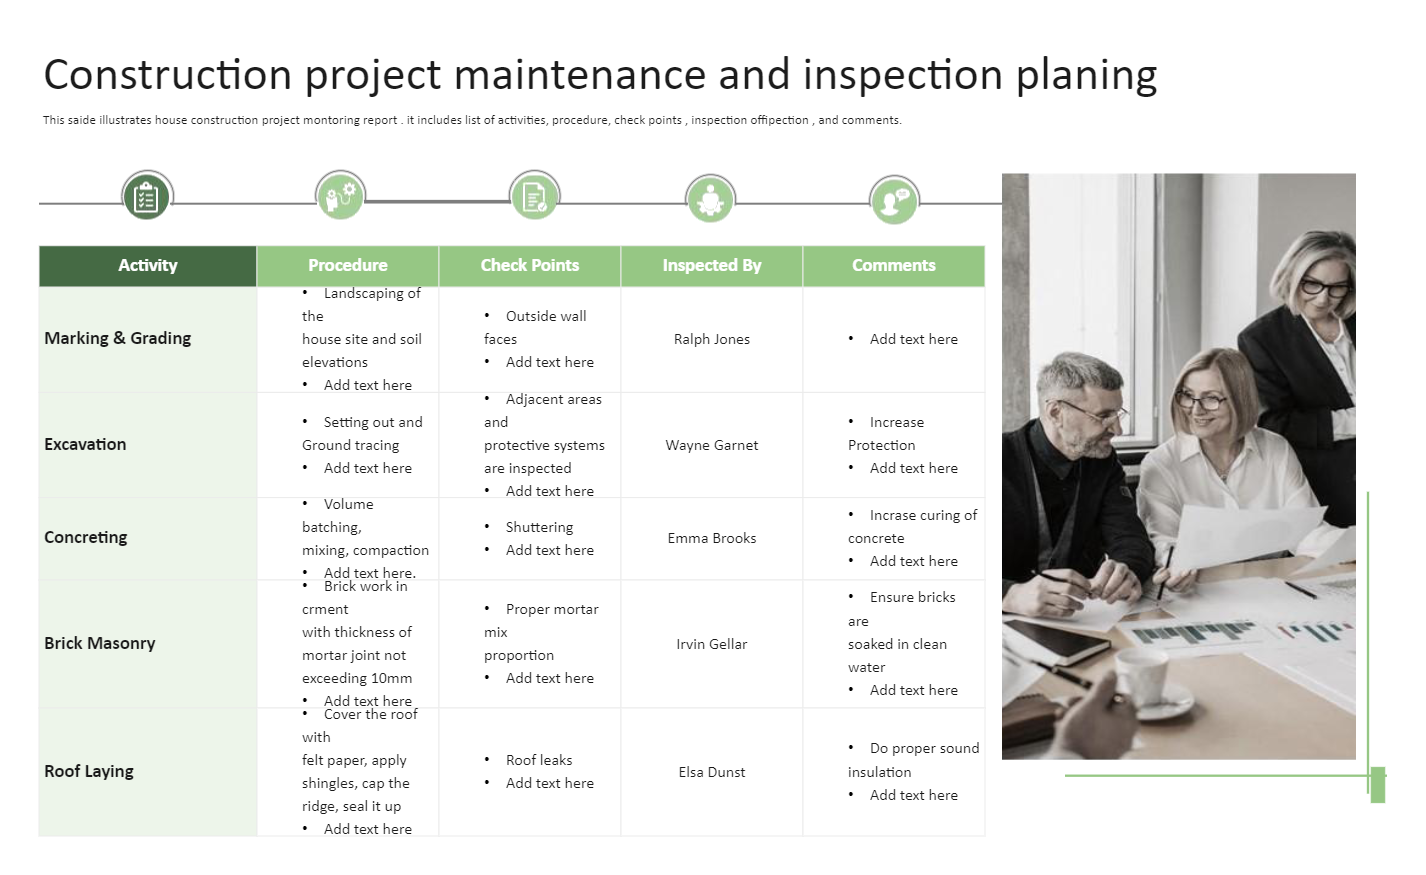 Construction Project Maintenance and Inspection Planning